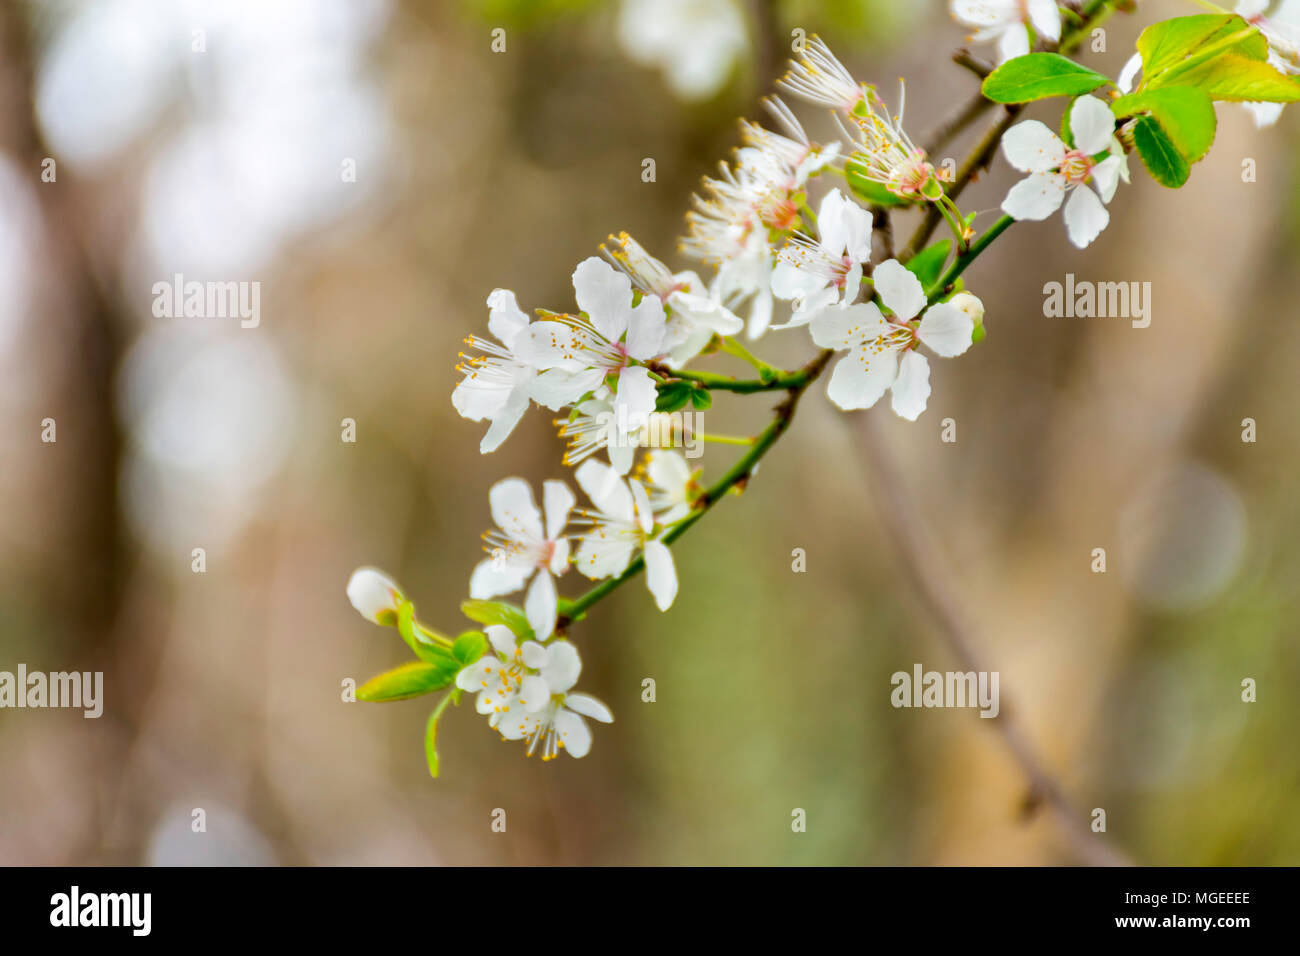 Closeup of the branch of an almond tree in full bloom Stock Photo